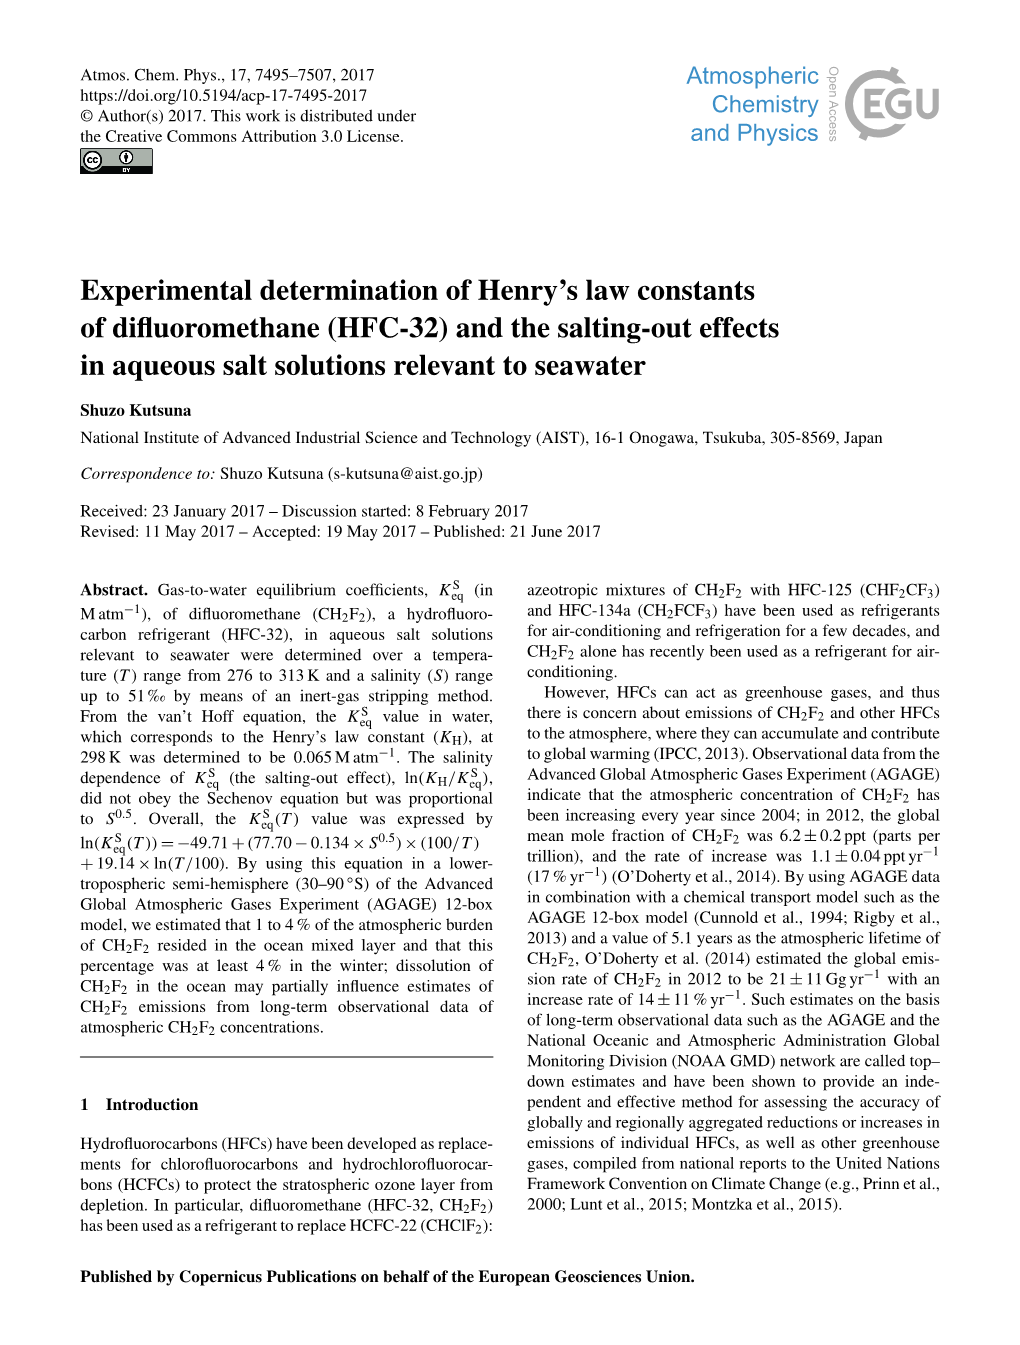 Experimental Determination of Henry's Law Constants of Difluoromethane